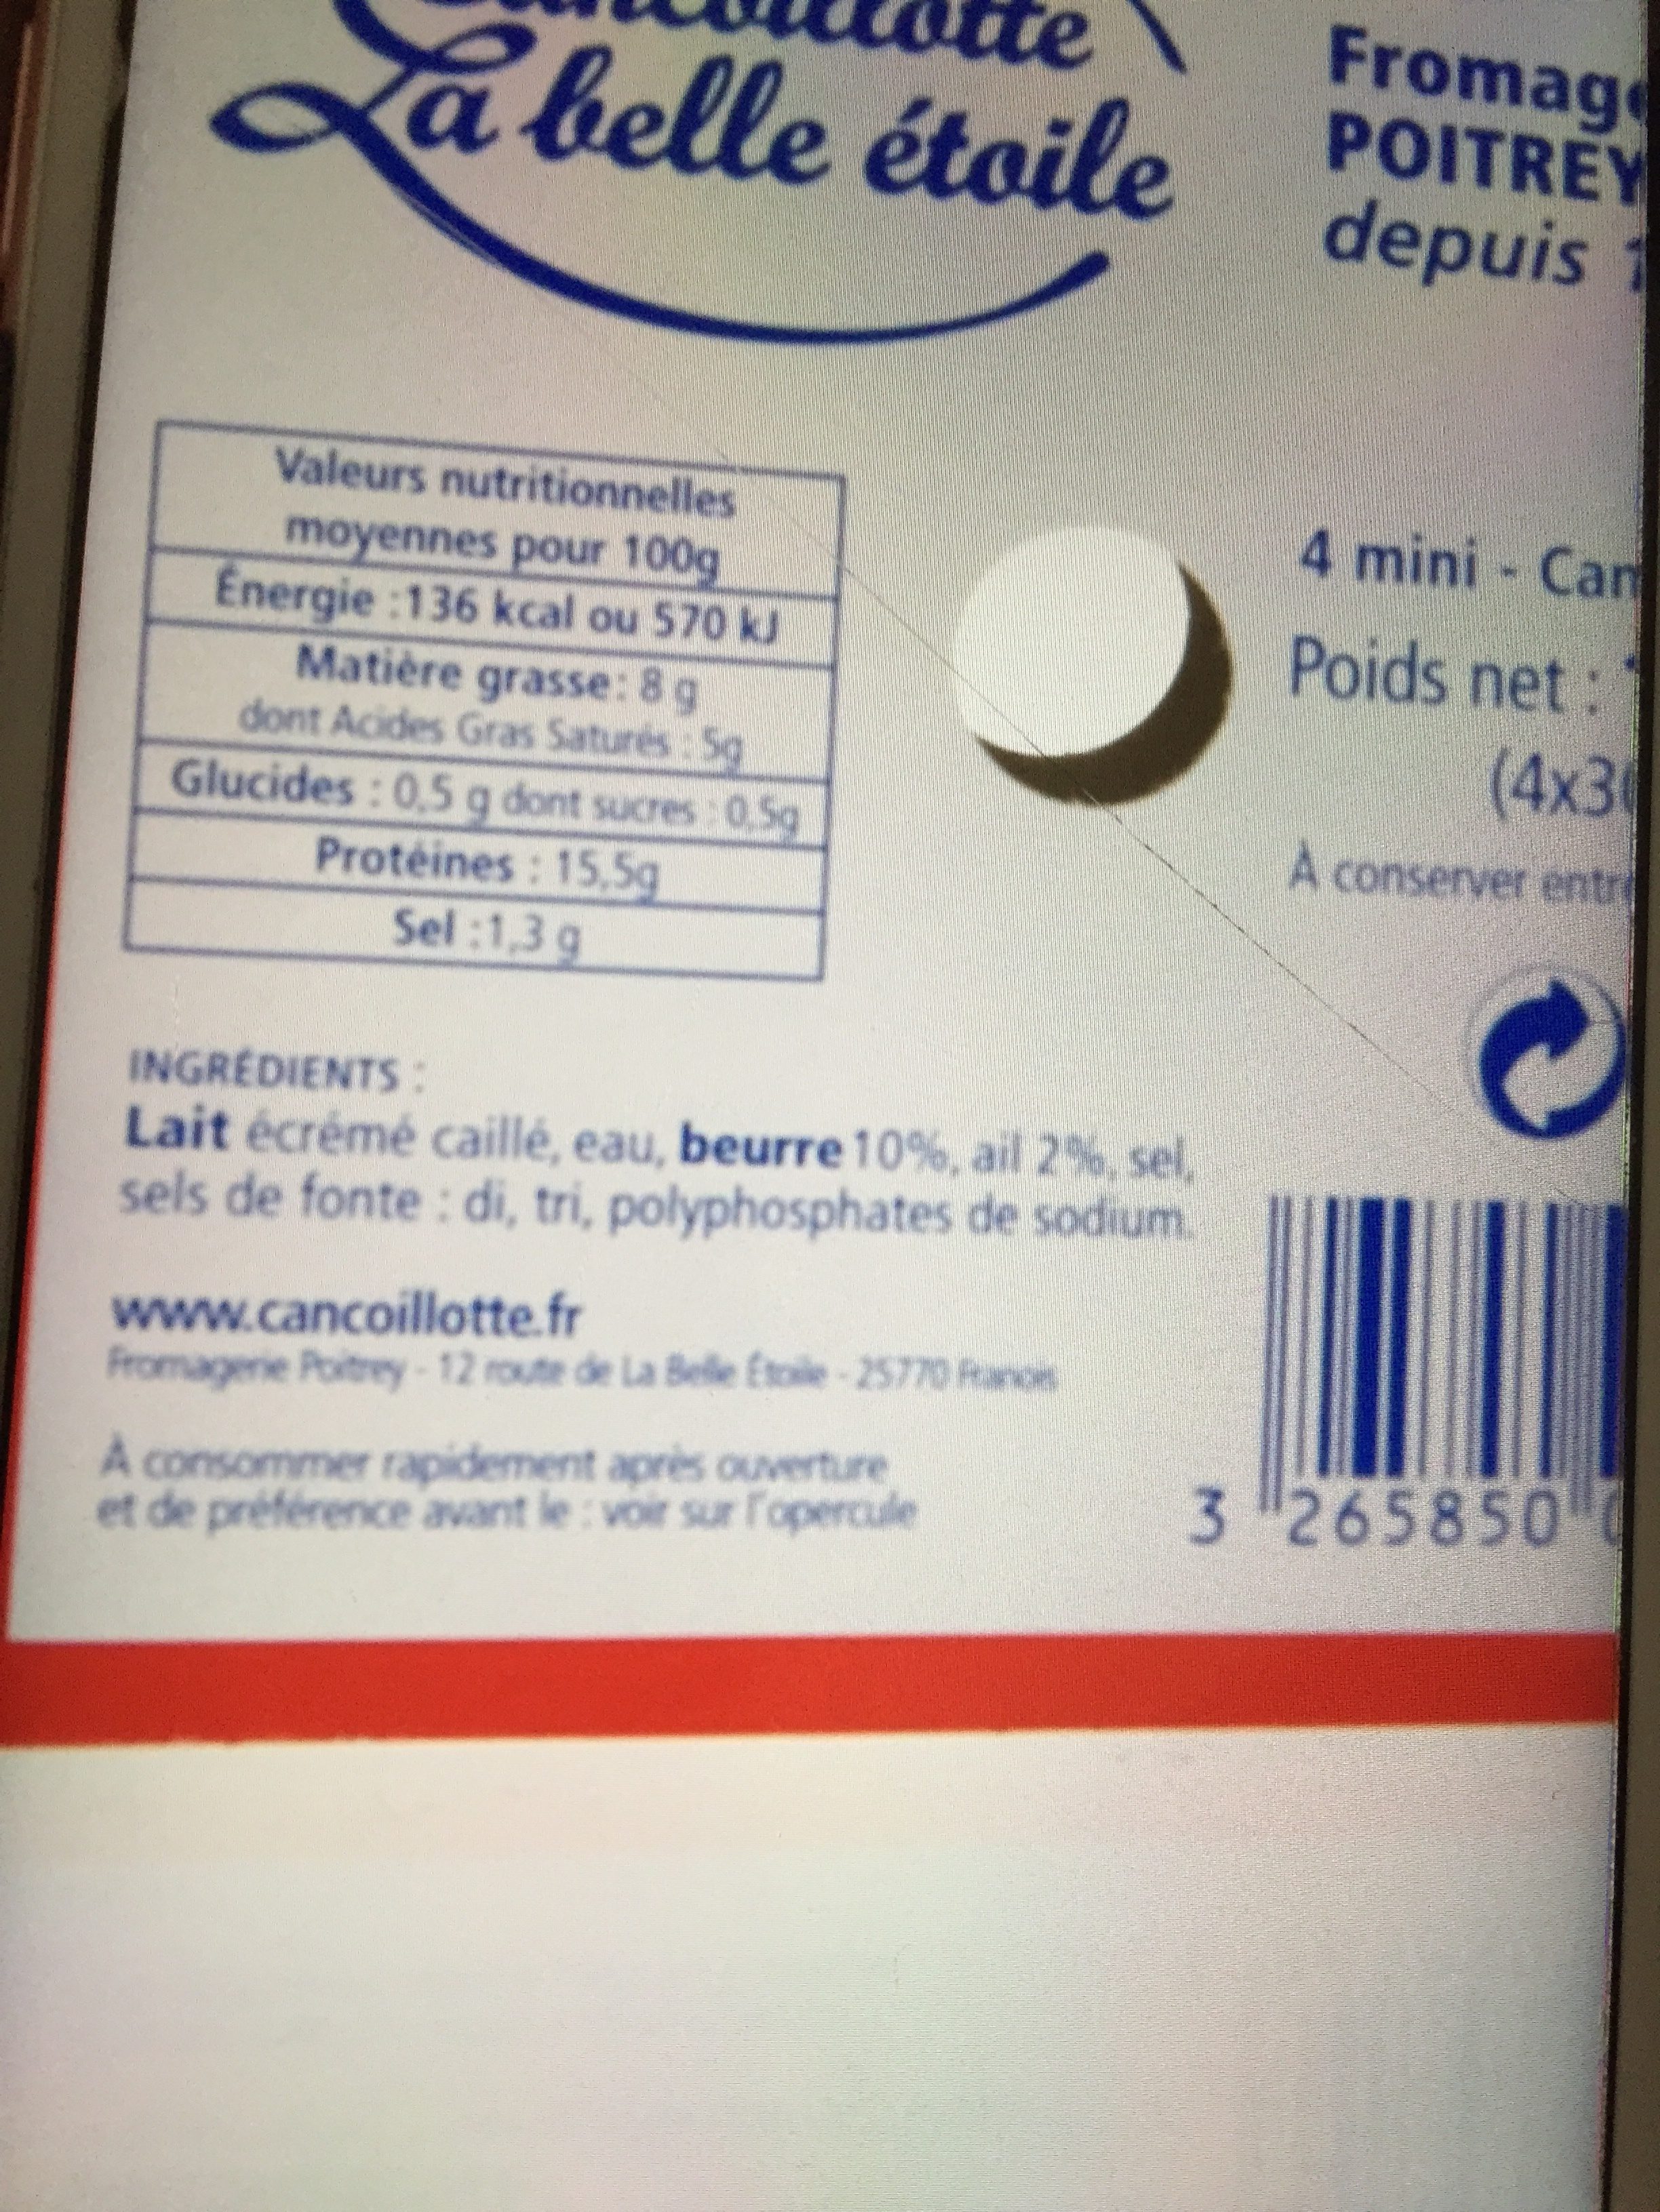 Cancoillotte Portion Ail 4x30g - Nutrition facts - fr